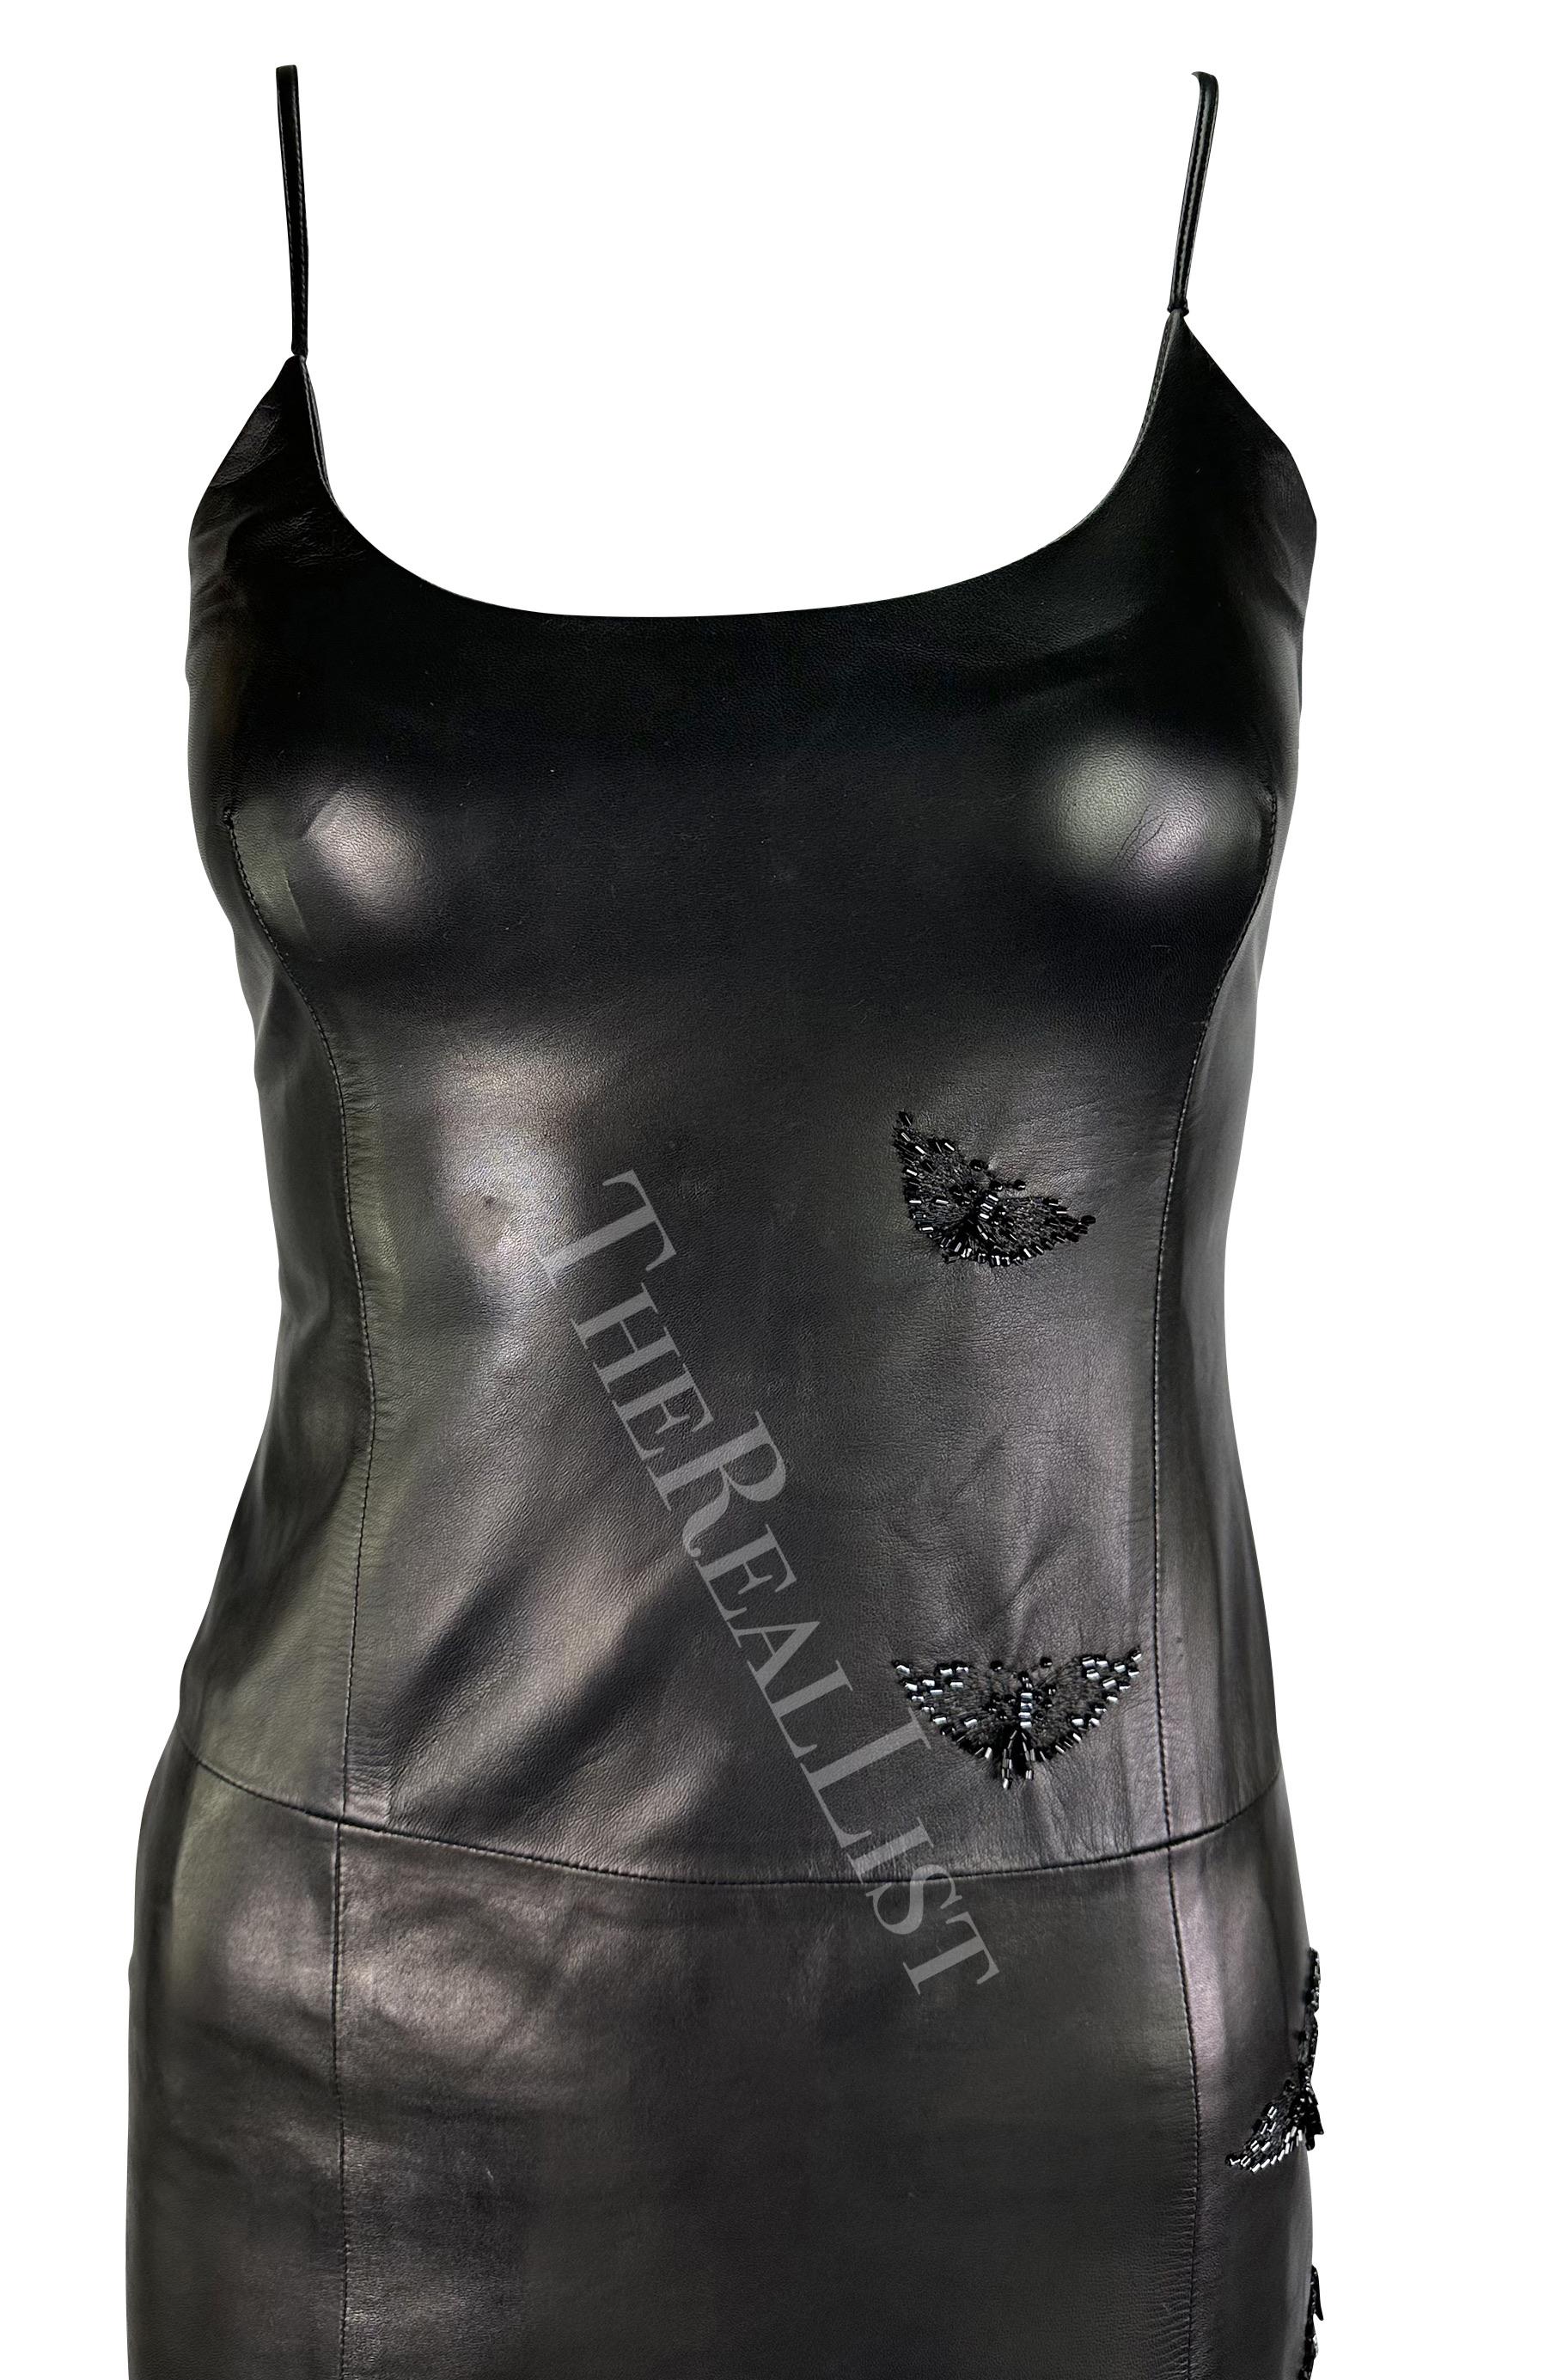 Presenting an incredible black leather Gianni Versace mini dress, designed by Donatella Versace. From 1999, this sexy dress is constructed entirely of leather and is made complete with a beaded butterfly design on one side. The dress features a wide